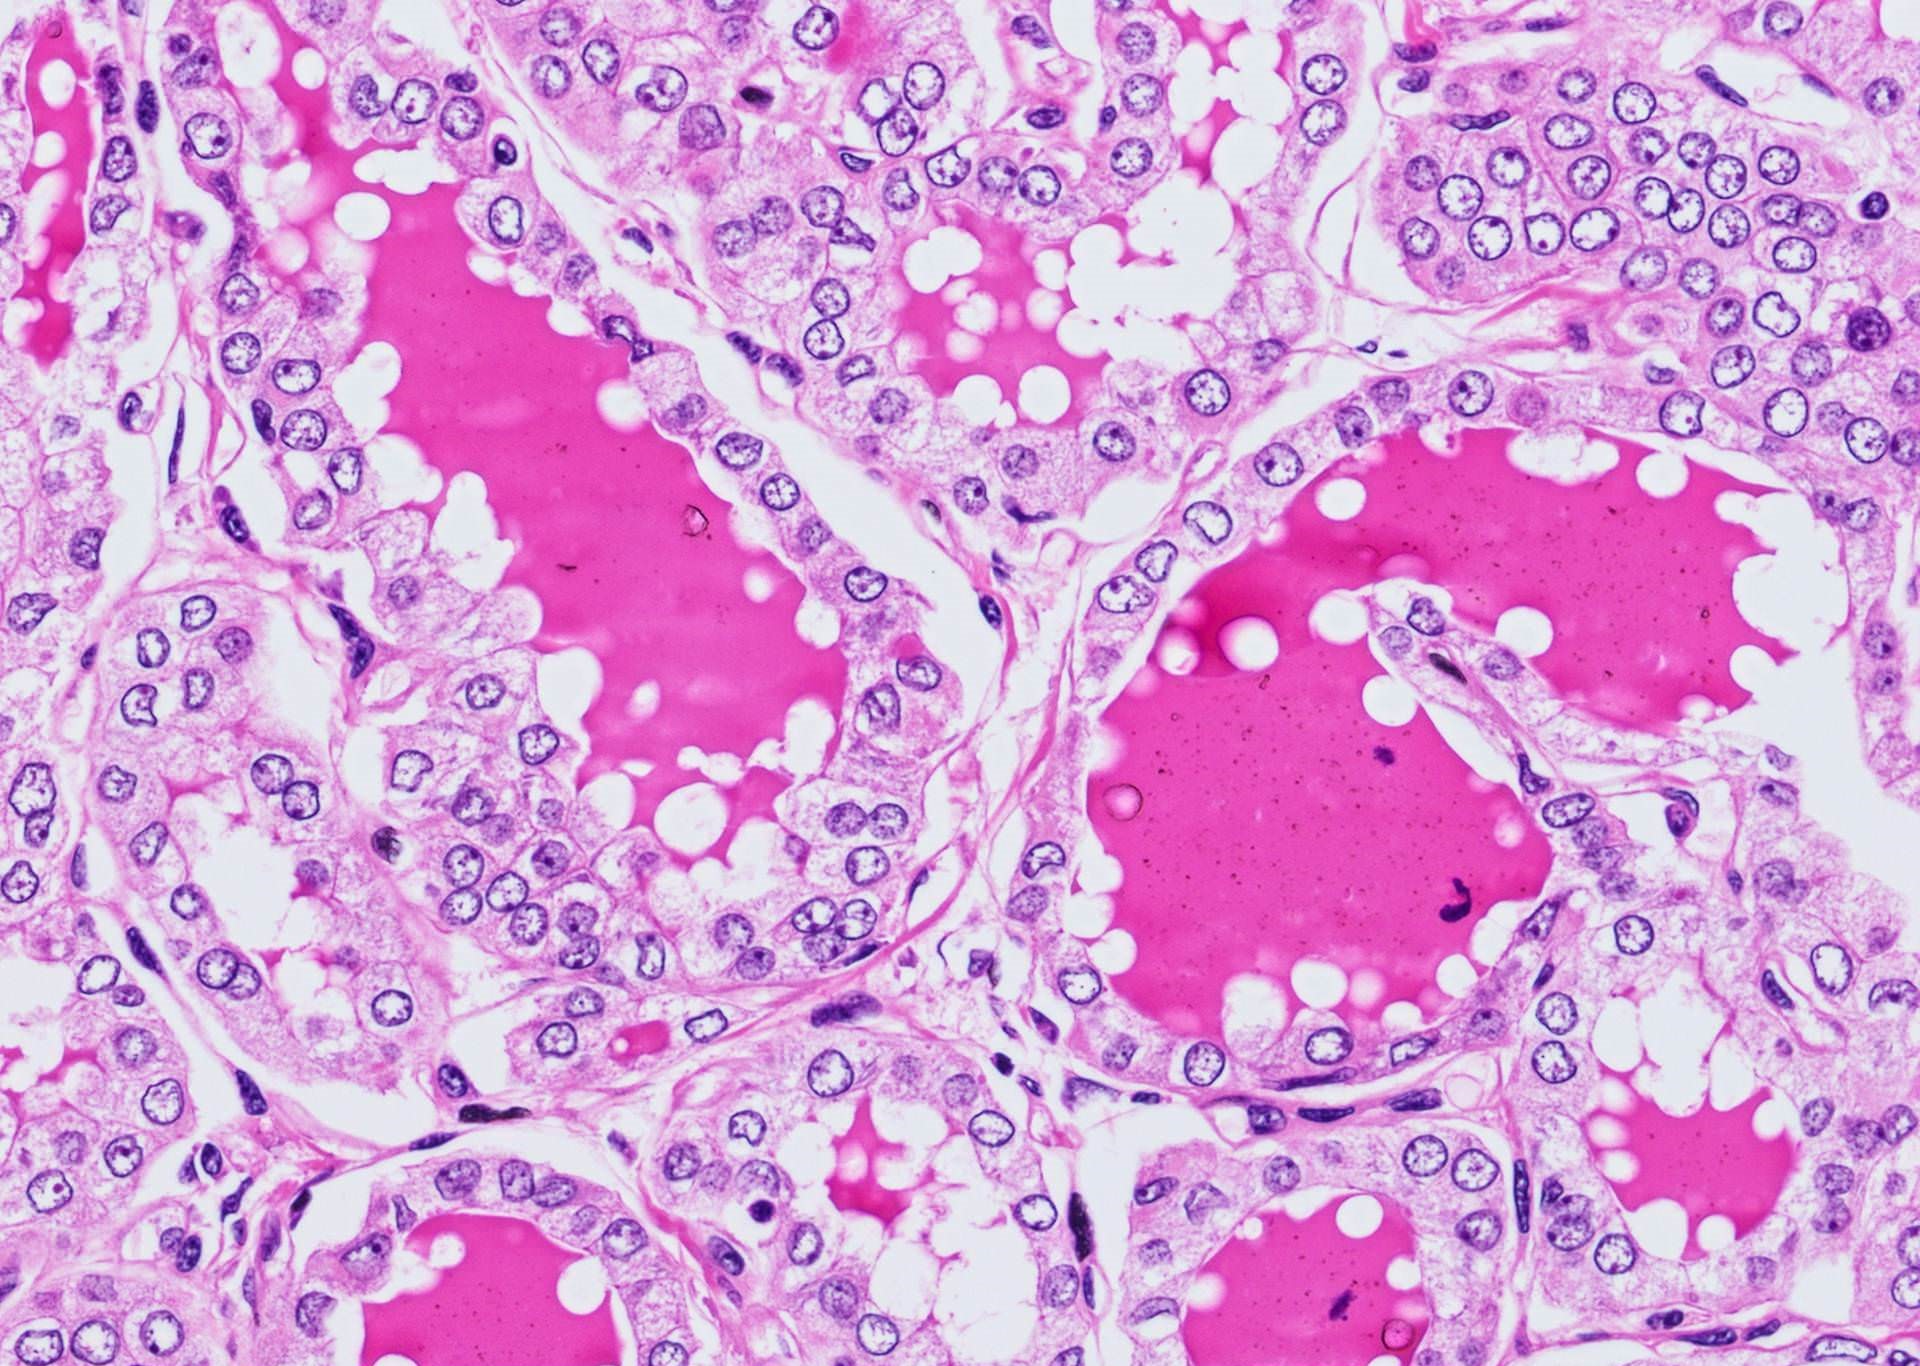 Vesicular nuclei with irregular membranes